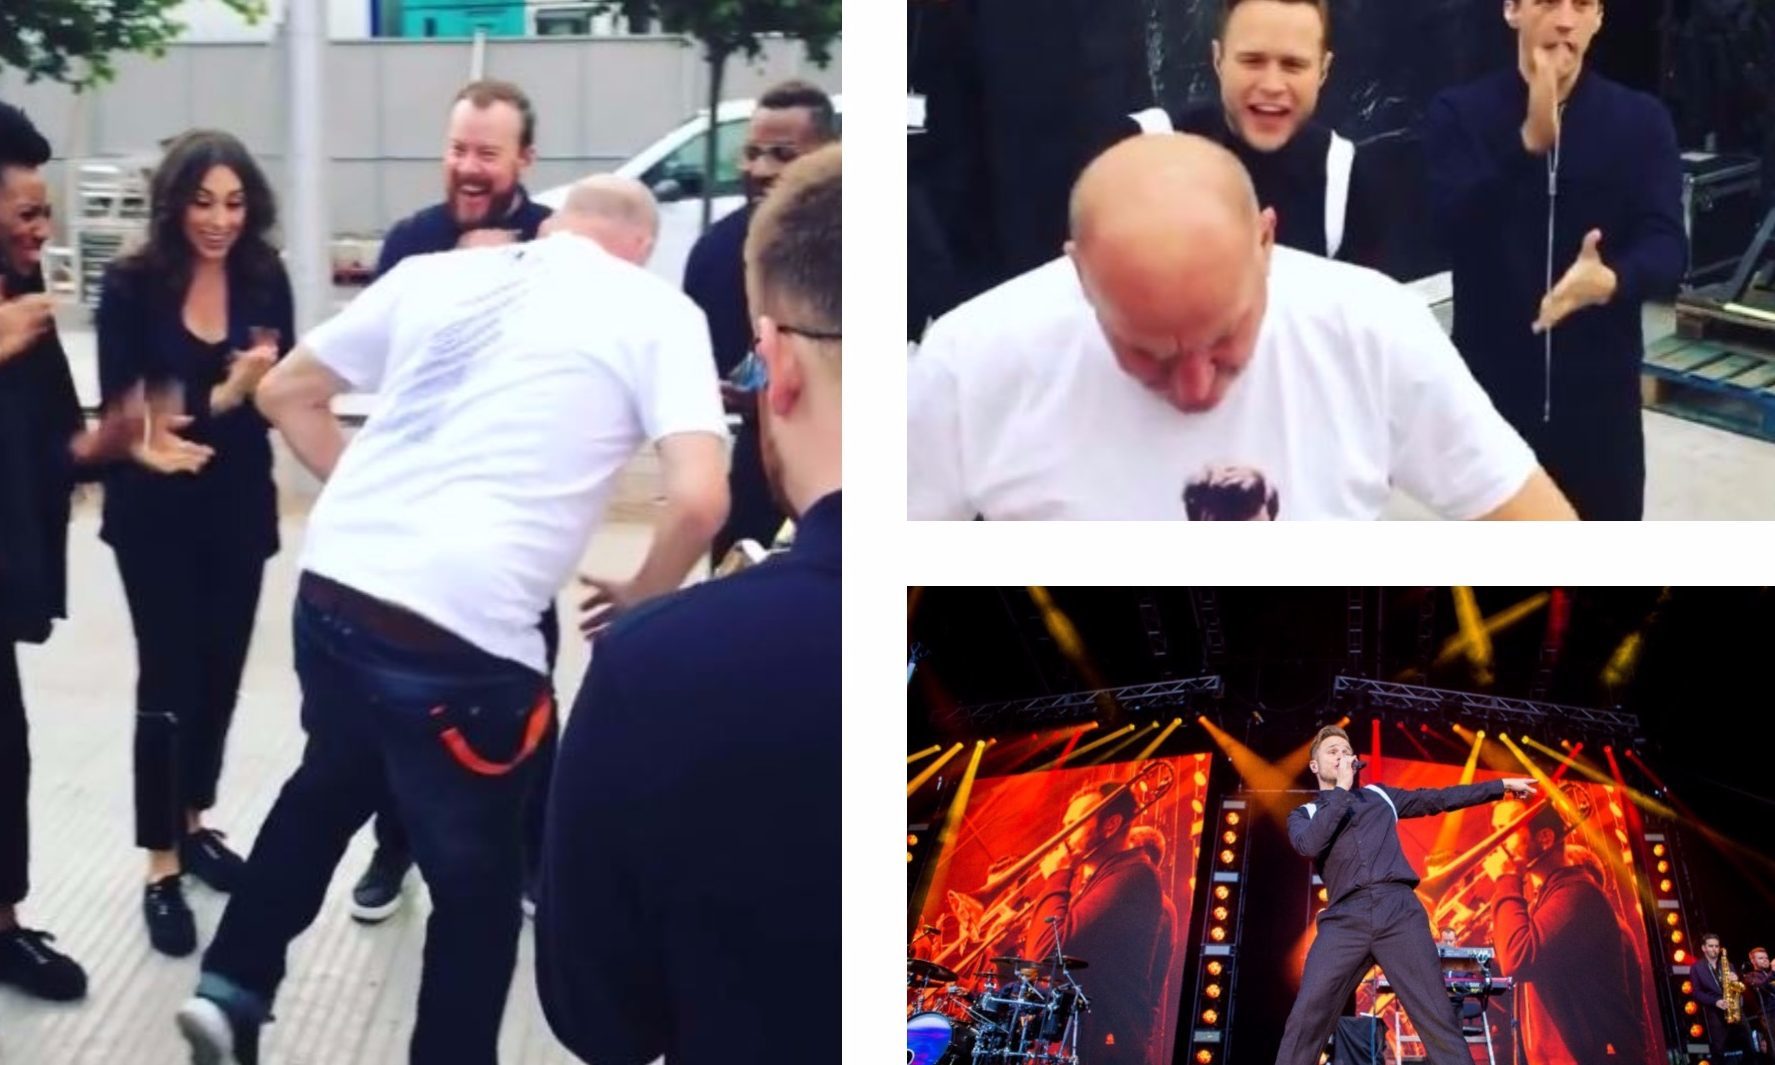 Olly Murs shared footage of his bus driver dancing back stage at Slessor Gardens.